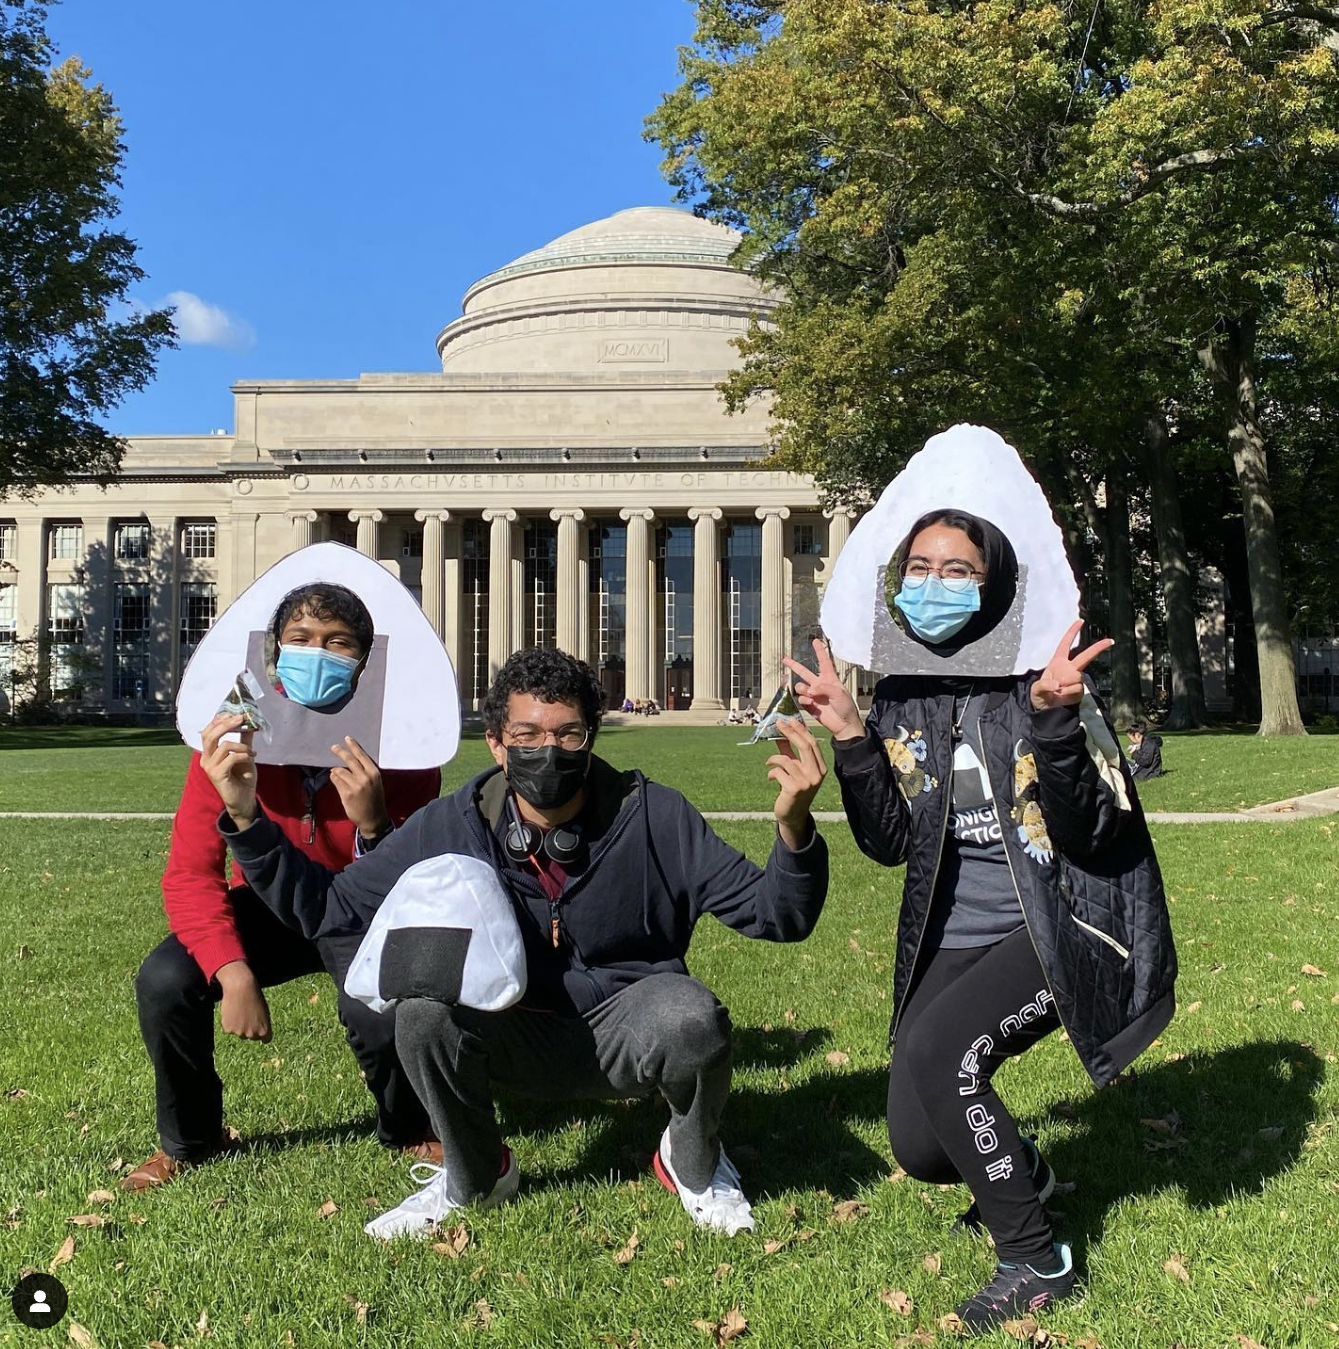 Marwa AlAlawi wearing a onigiri photobooth prop holding two peace signs with both hands crouching down halfway to the right with two other MIT students who's also crouching down on the grass, one wearing a onigiri photobooth prop and another with glasses holding an onigiri rice ball in one hand and rested on his thigh, an onigiri pillow in front of Killian Court at MIT